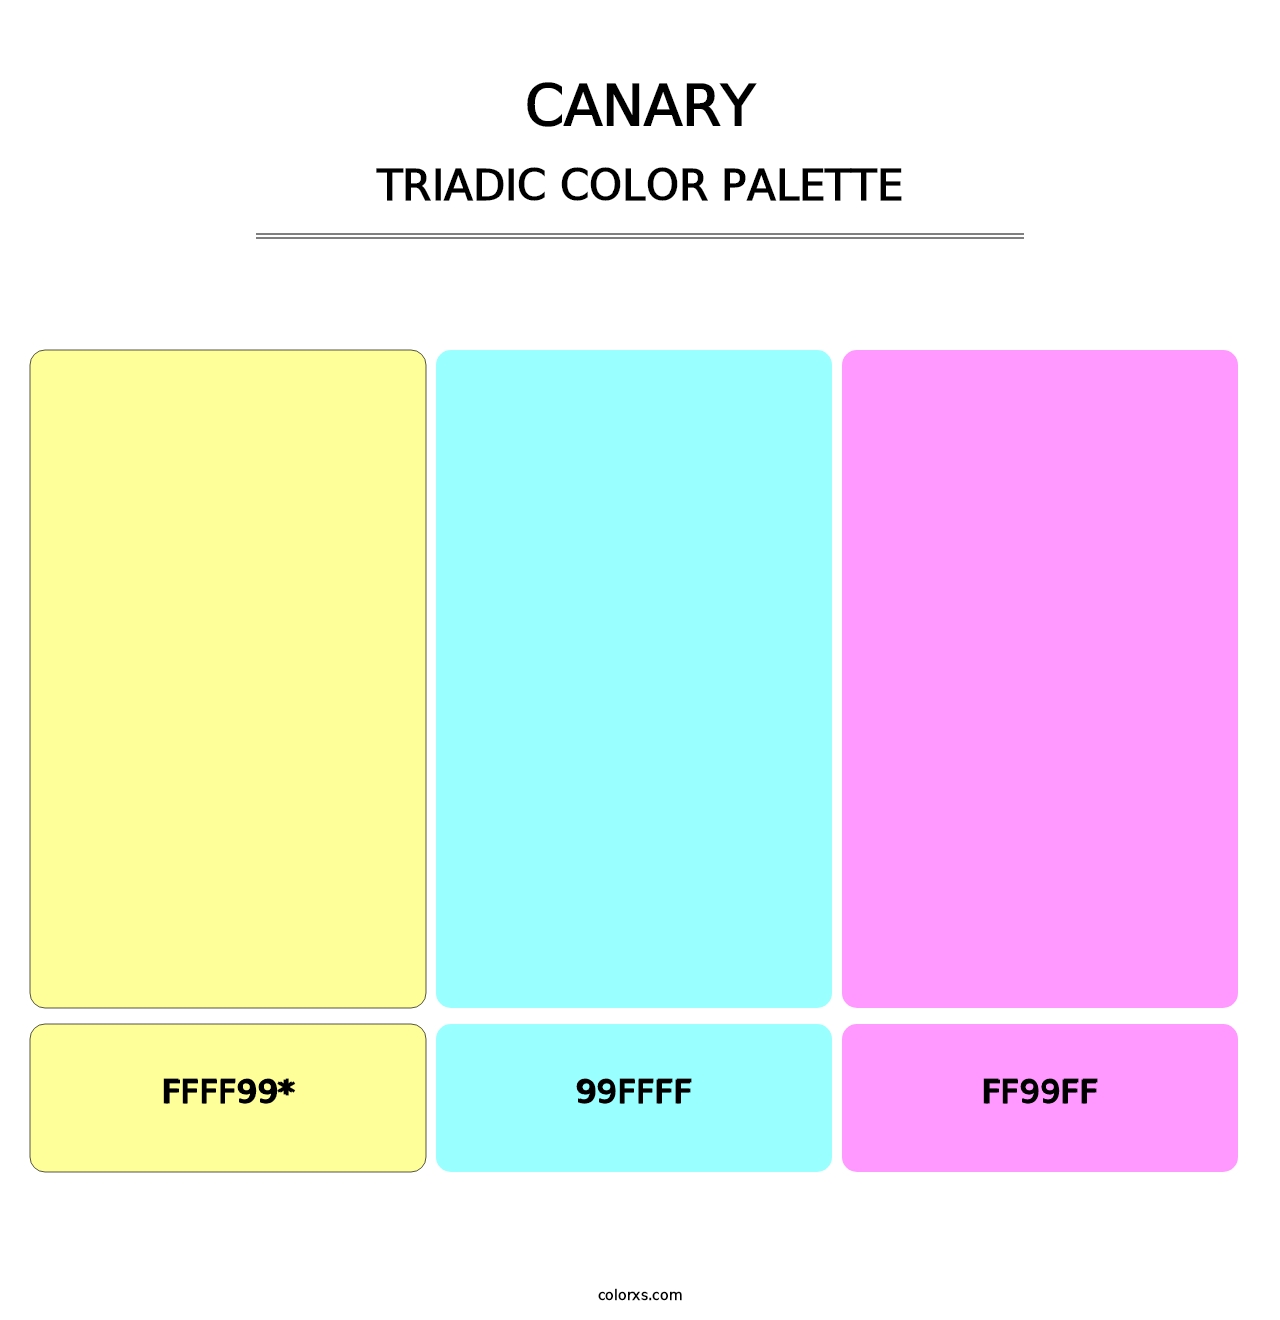 Canary - Triadic Color Palette